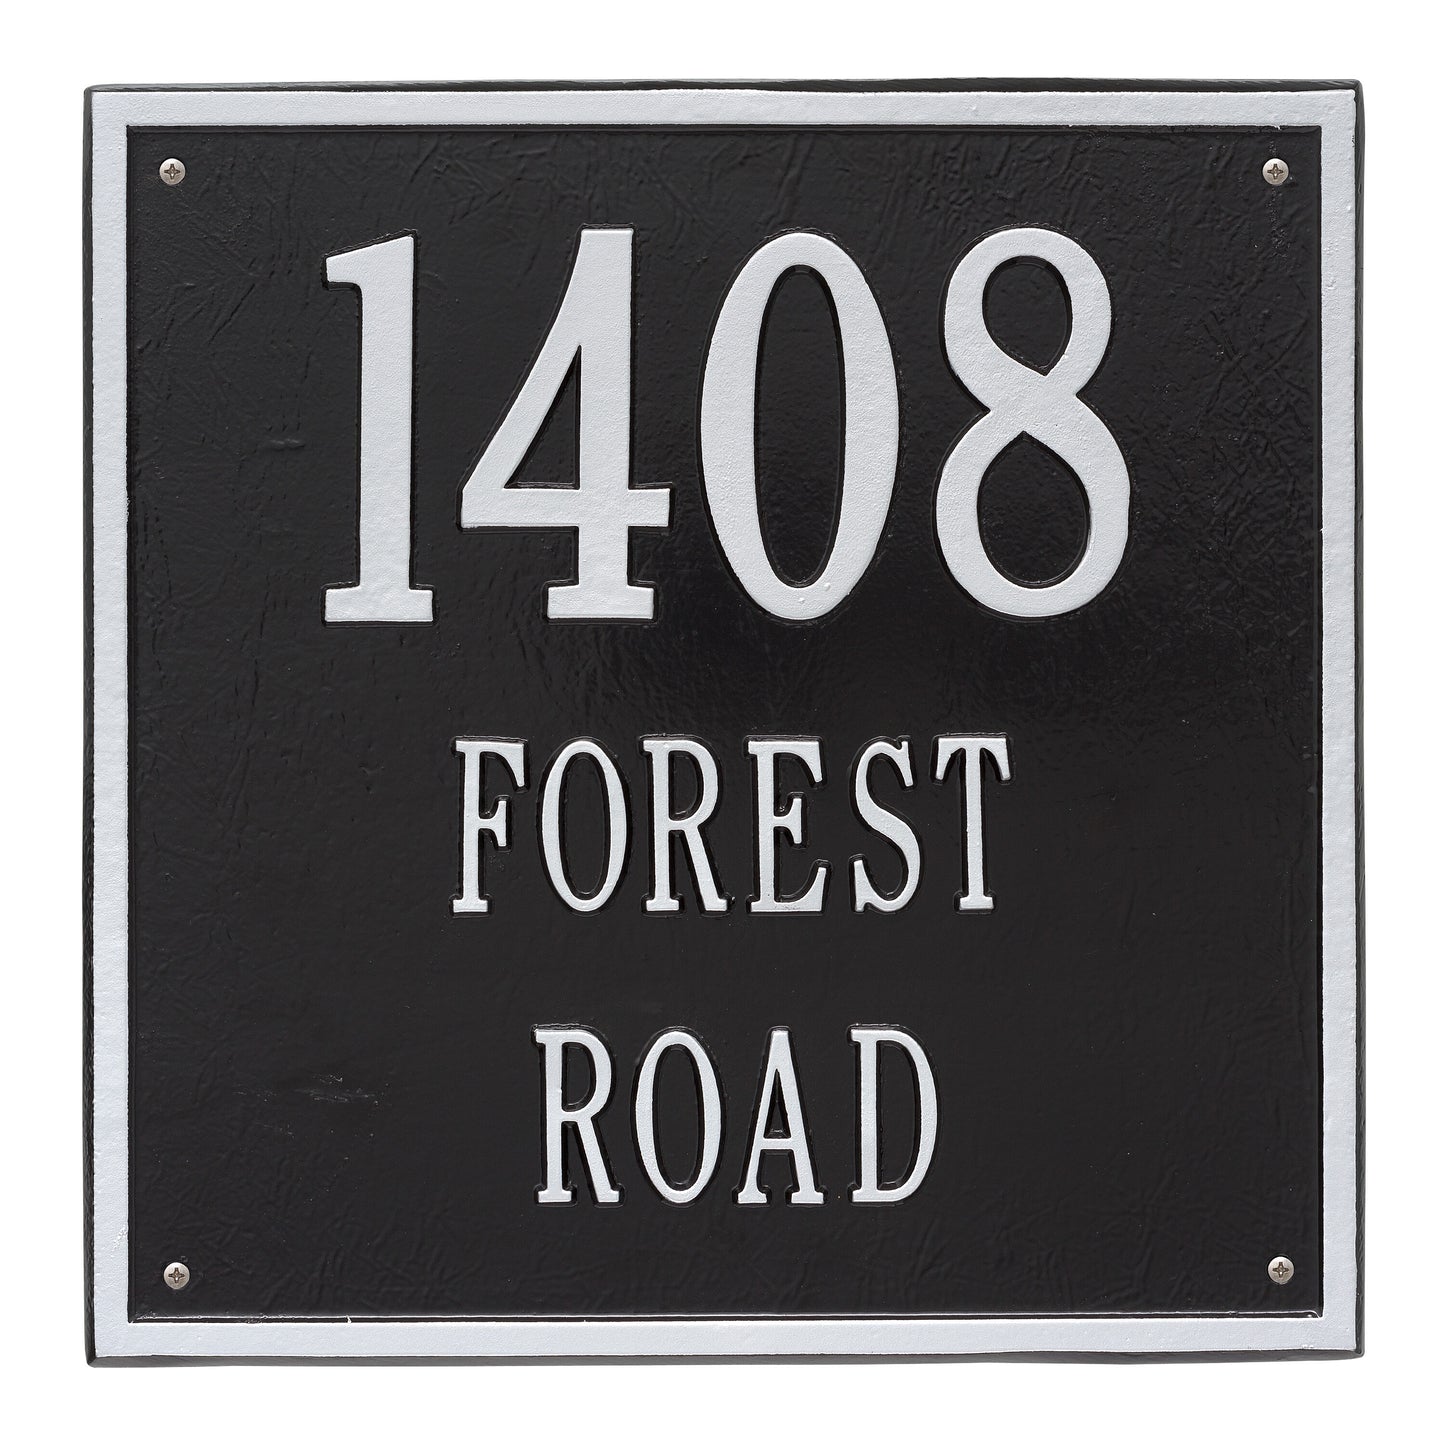 Whitehall Products Personalized Square Estate Wall Plaque Three Line Black/white